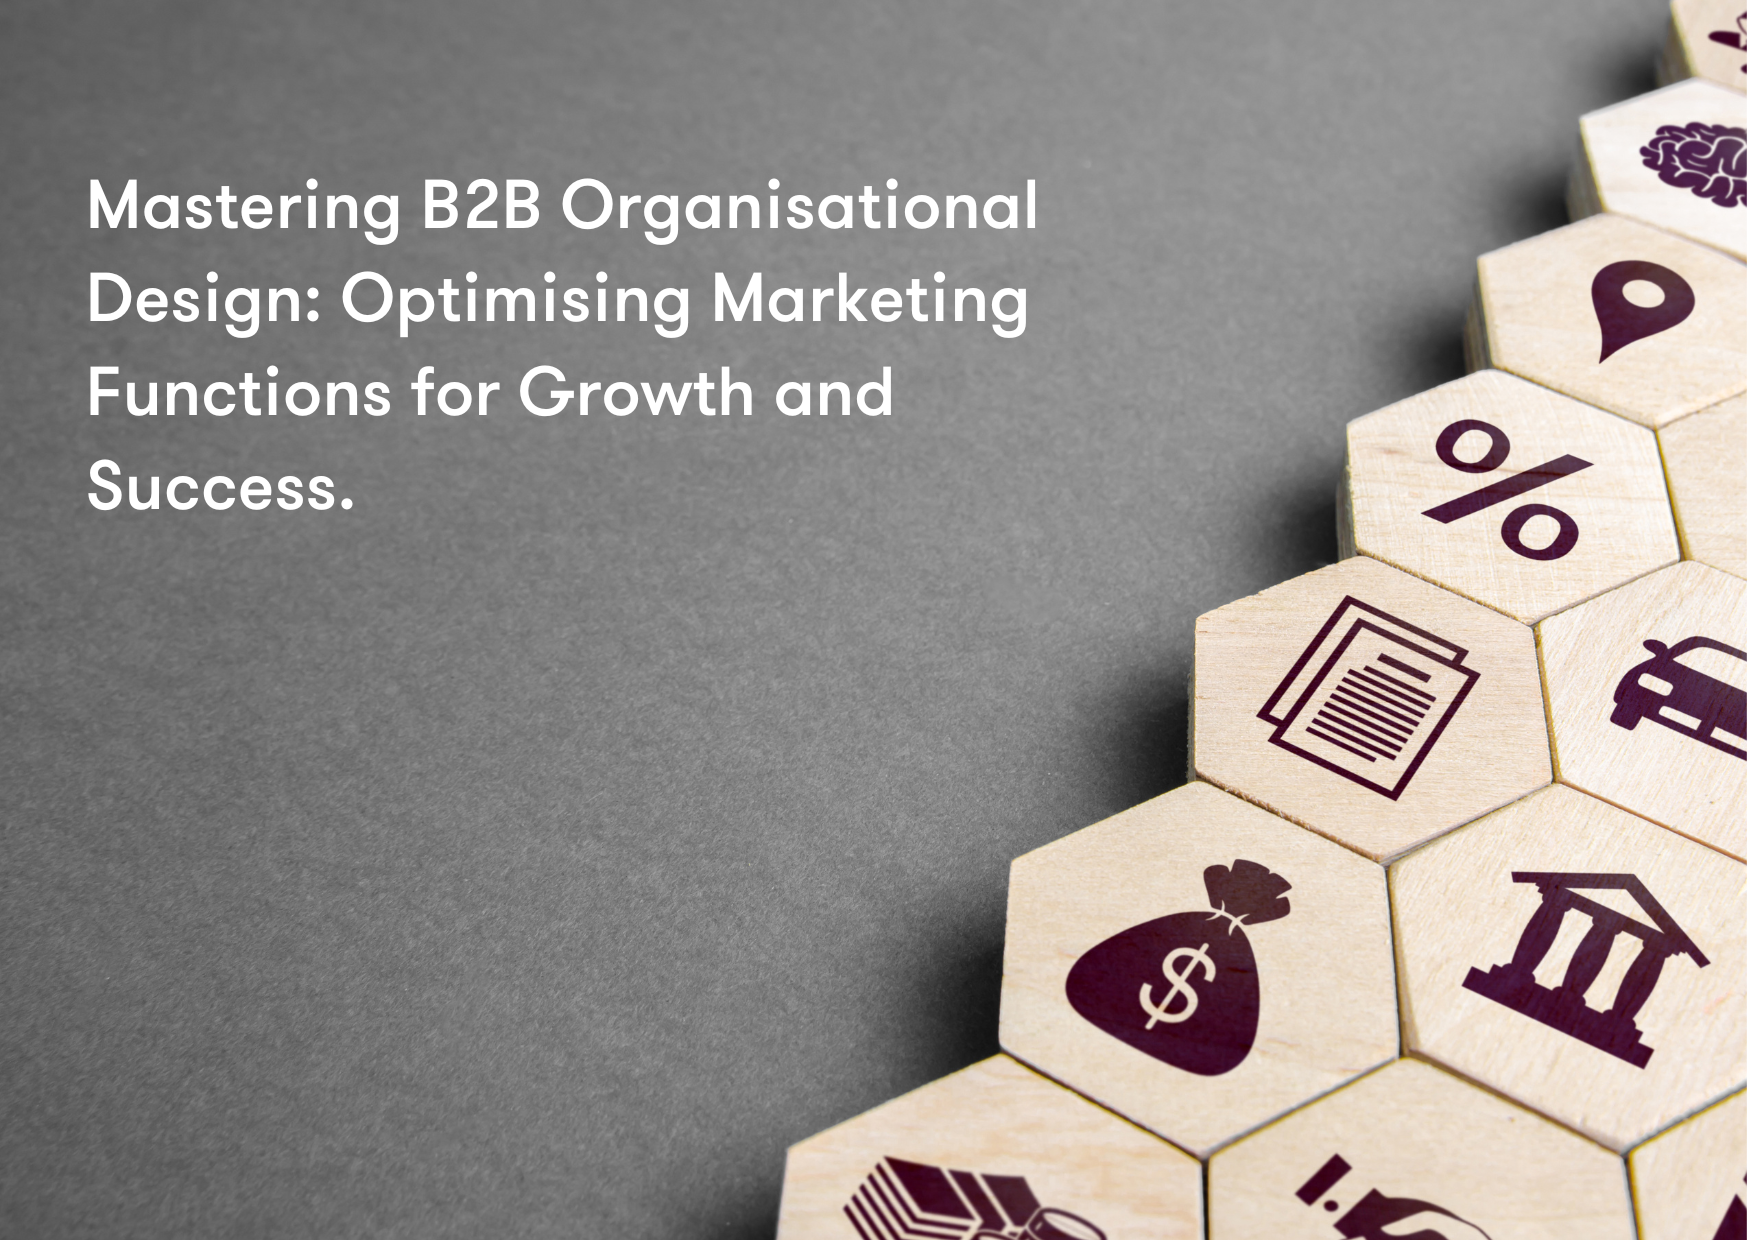 Mastering B2B Organisational Design: Optimising Marketing Functions for Growth and Success.